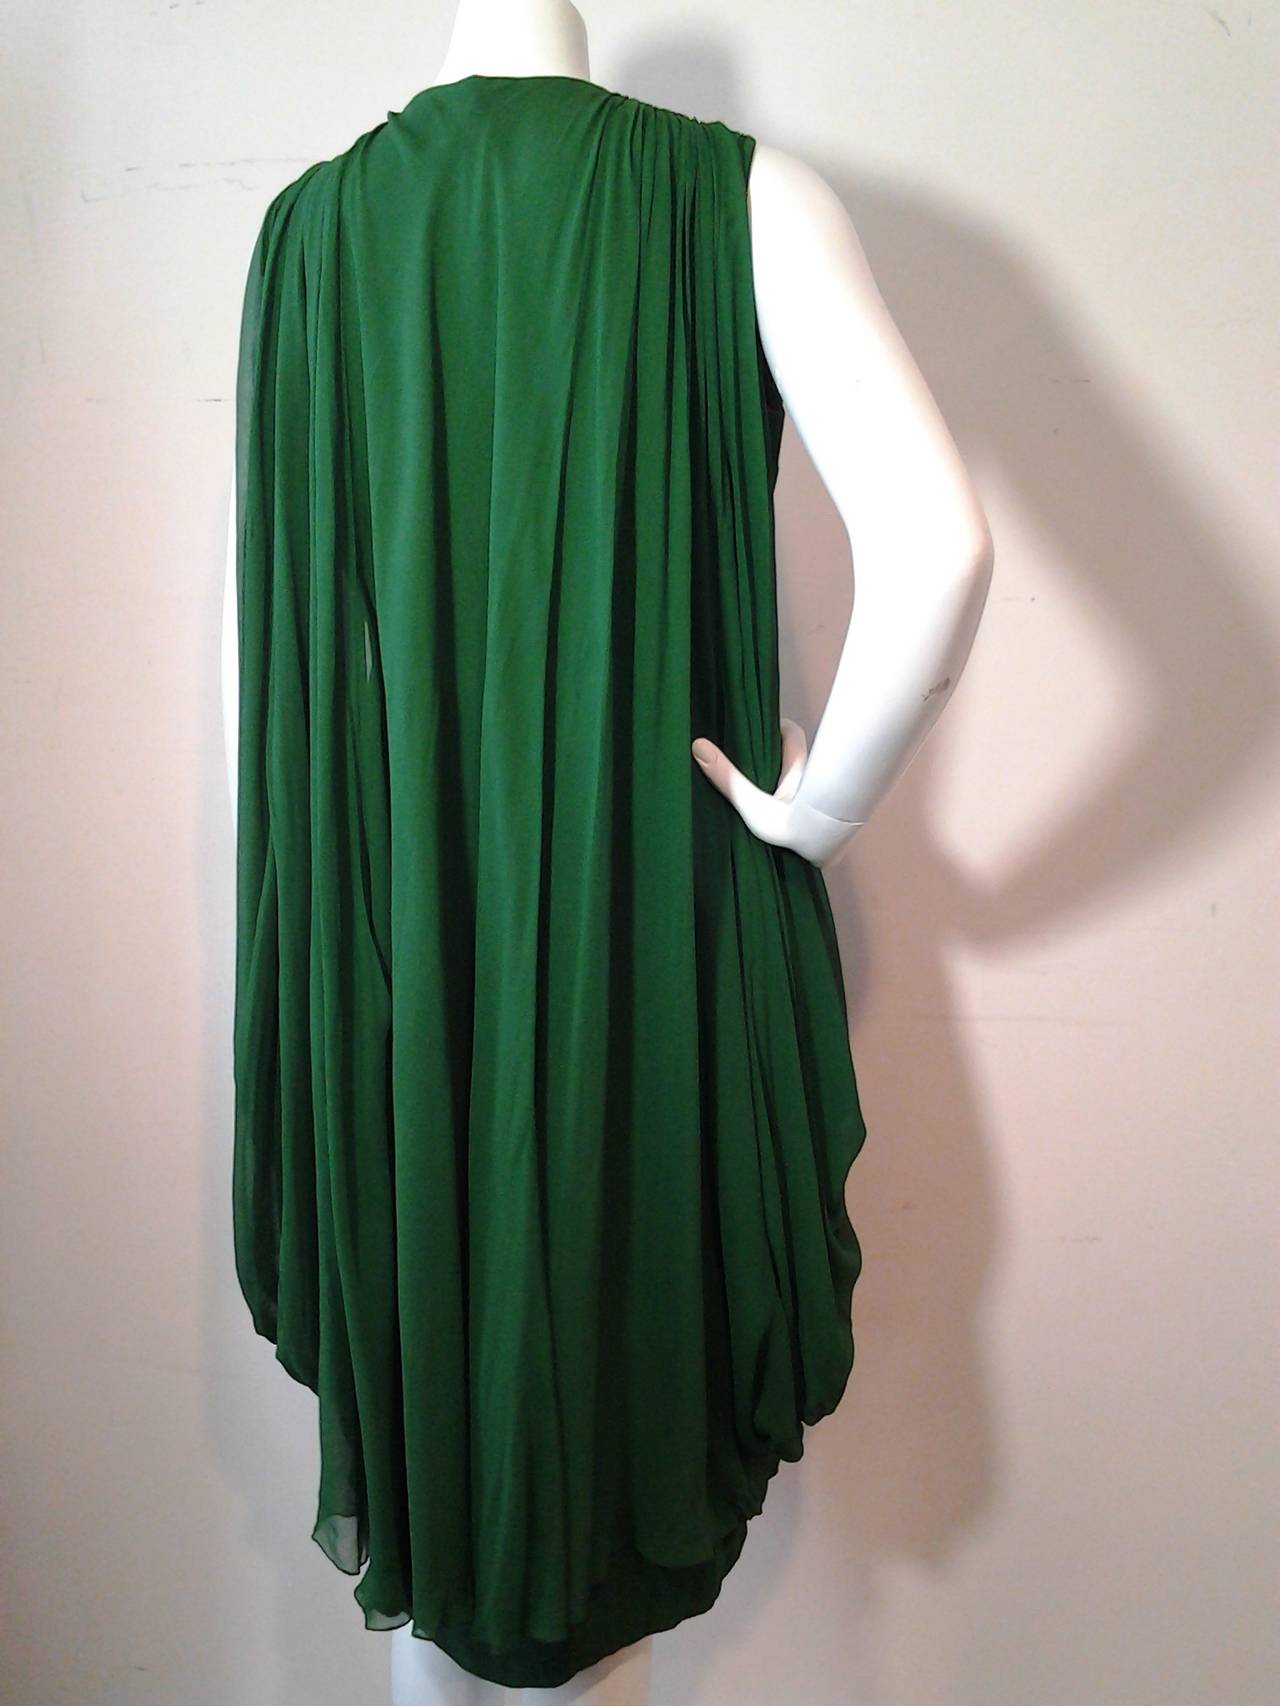 A wonderful 1960s Saks Fifth Avenue emerald silk chiffon cocktail dress: Empire waist with heavy side draping. and Watteau back.  Full silk crepe sheath with chiffon overlay.